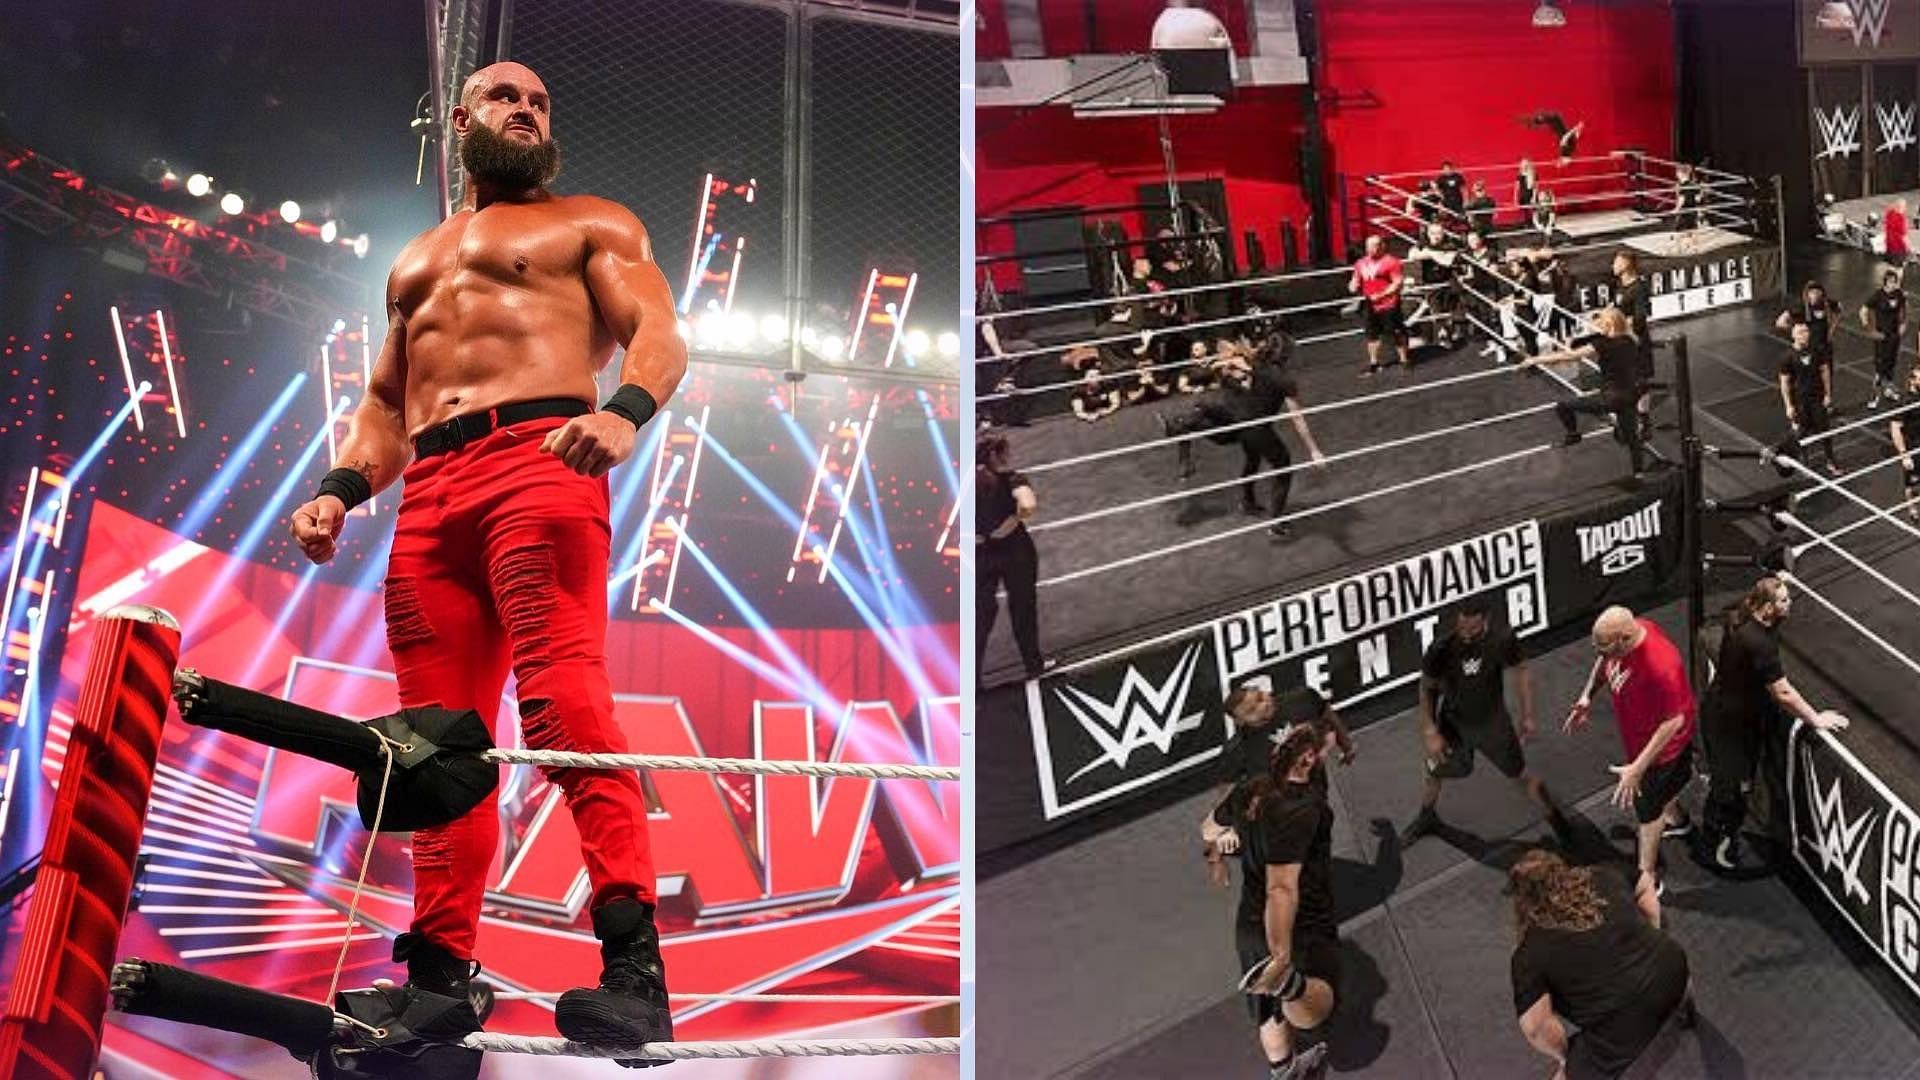 Braun Strowman is a graduate from the WWE Performance Center